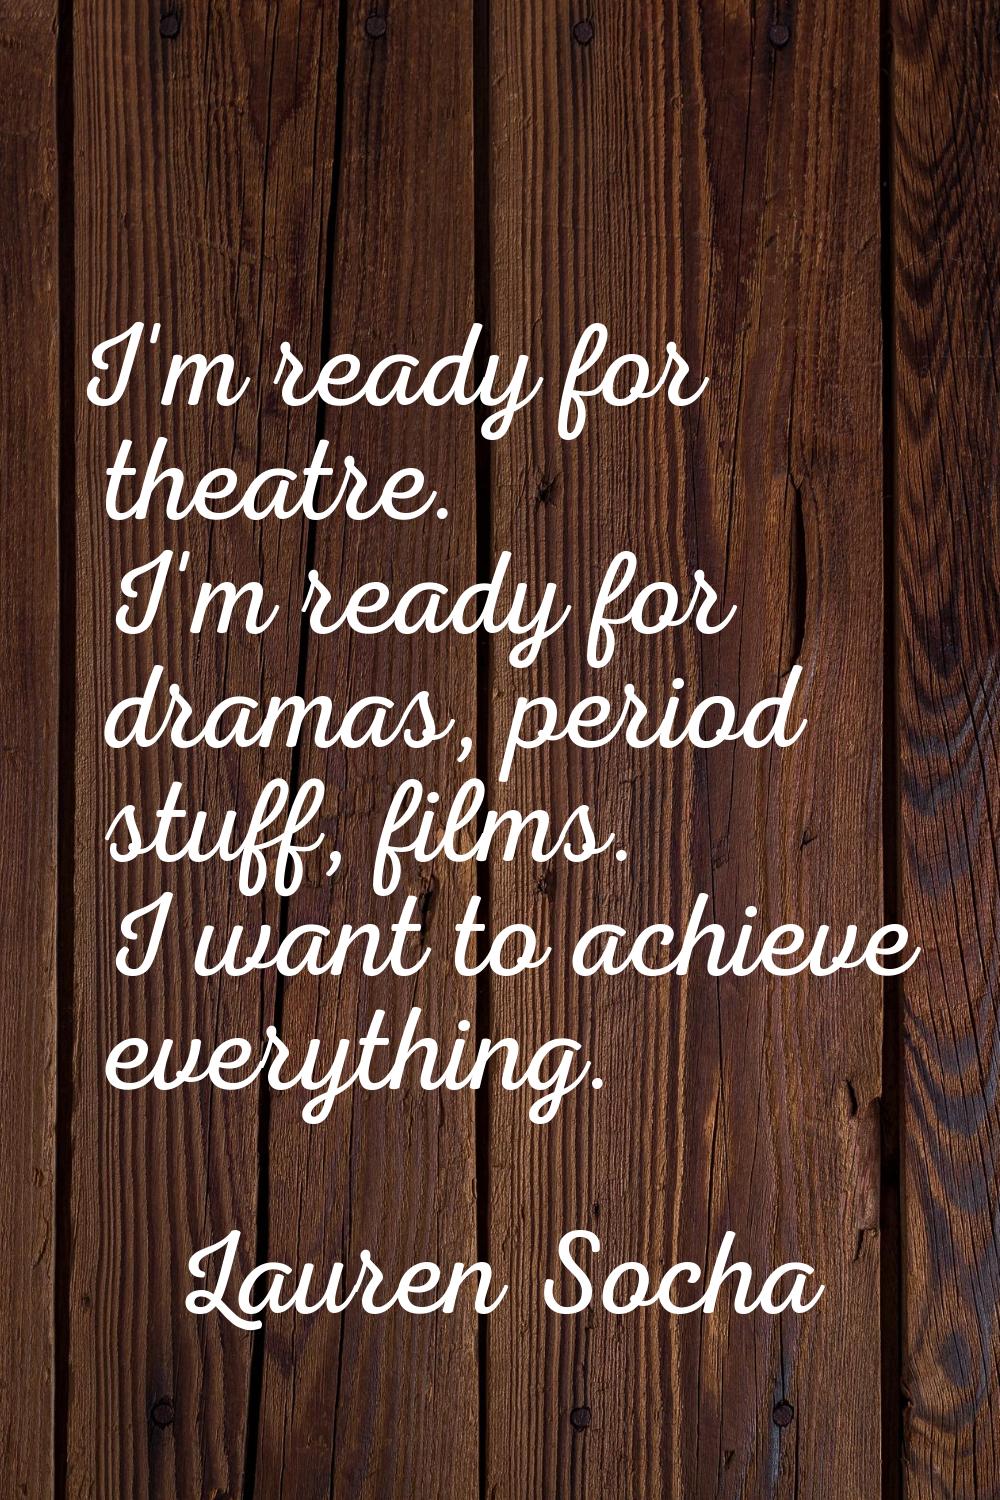 I'm ready for theatre. I'm ready for dramas, period stuff, films. I want to achieve everything.